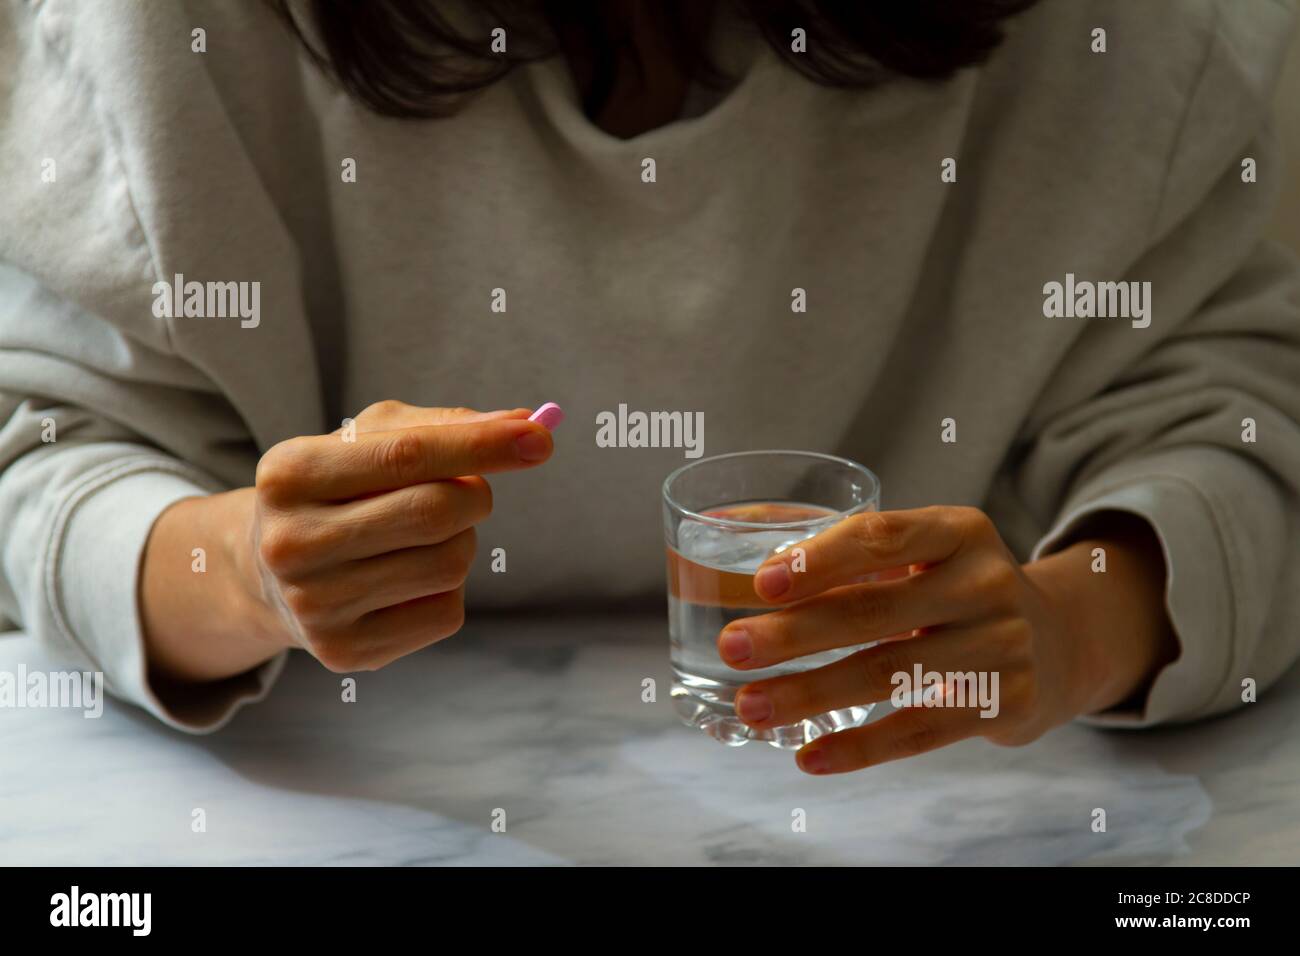 A woman is seen as she is holding a pill in one hand and a glass of water on the other hand. She is about to take the medication with a sip of water. Stock Photo